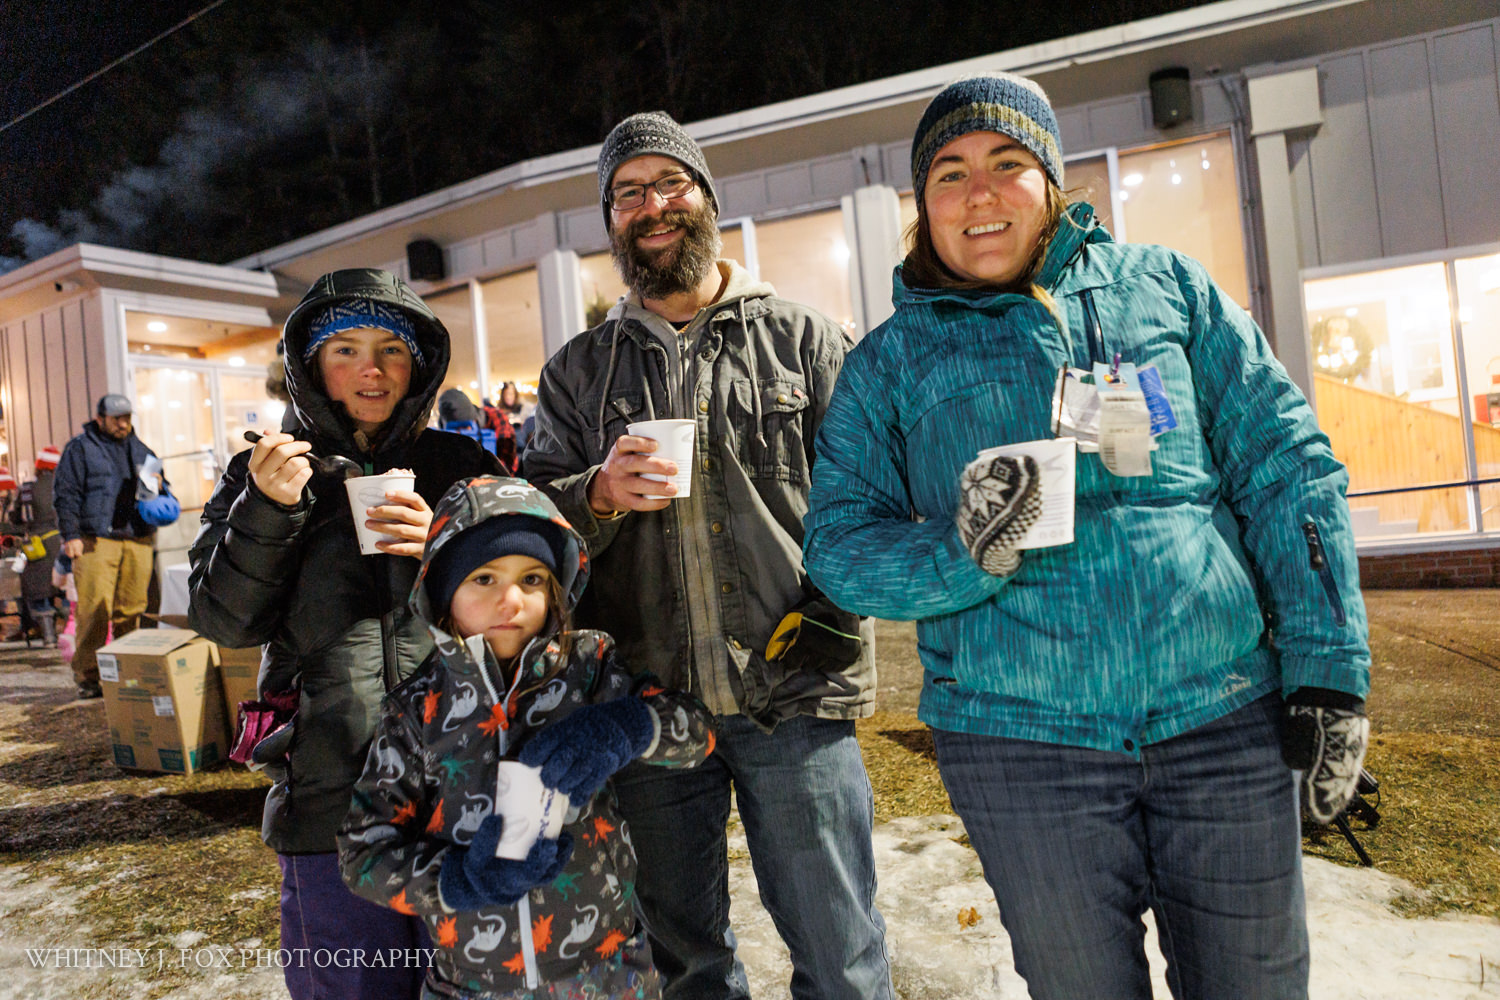 307 winter kids welcome to winter 2022 lost valley auburn maine documentary event photographer whitney j fox 3138 w